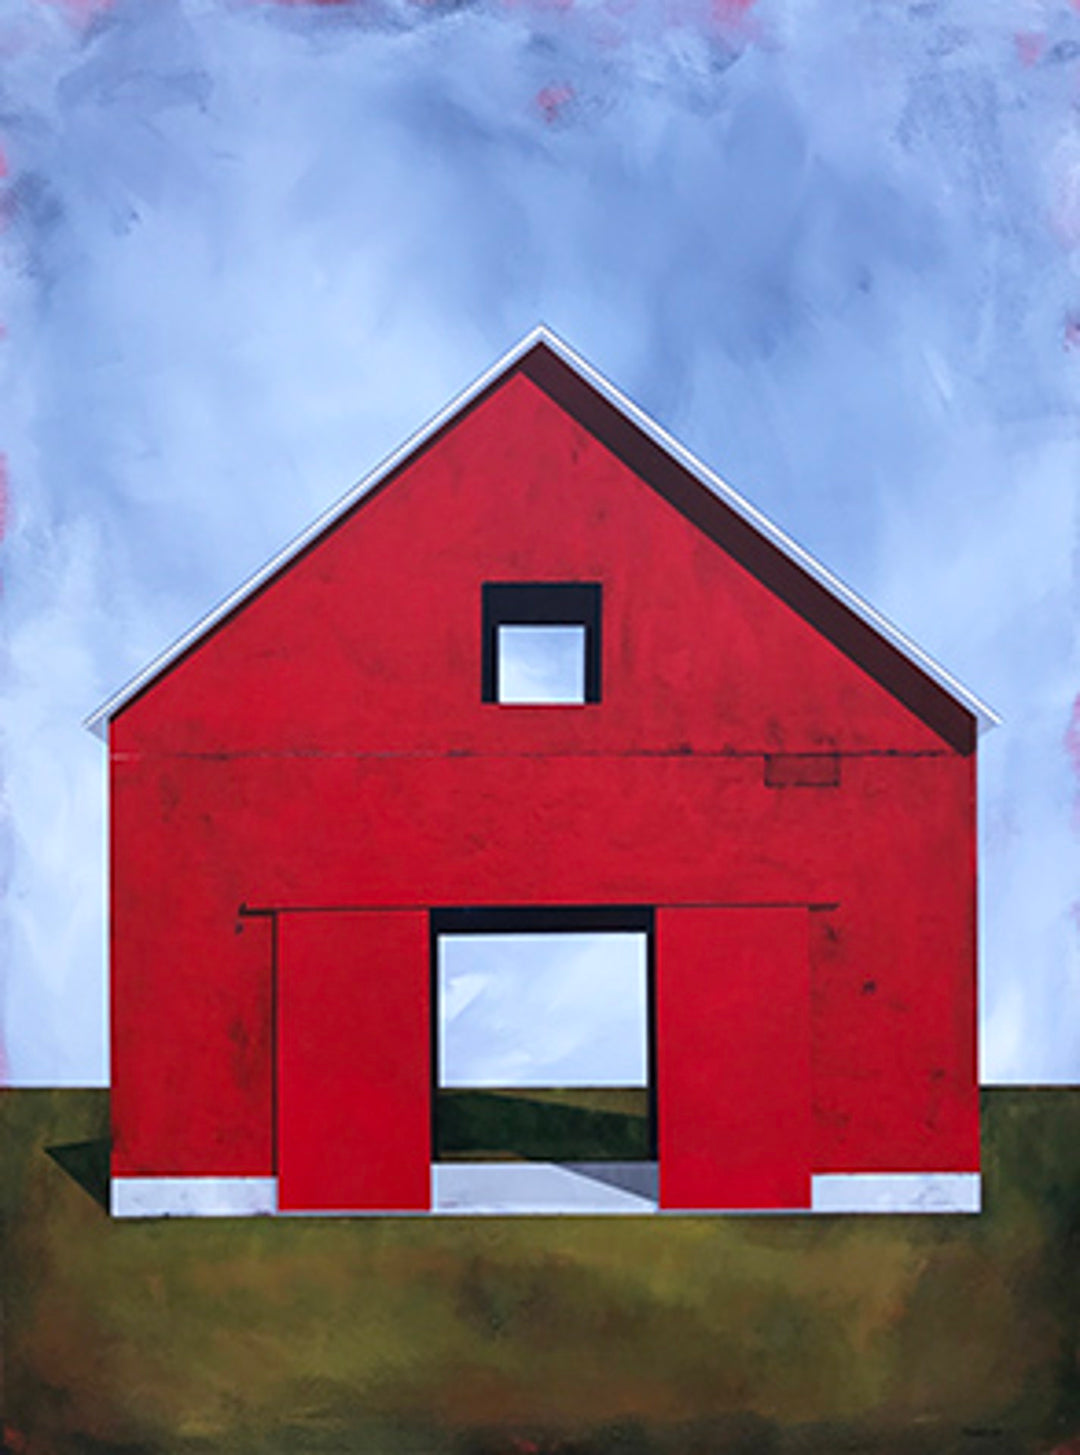 Justin Wheatley's 2019 painting captures the essence of a red barn nestled in a field, evoking the feeling of Justin Wheatley - 'Summer Air'.